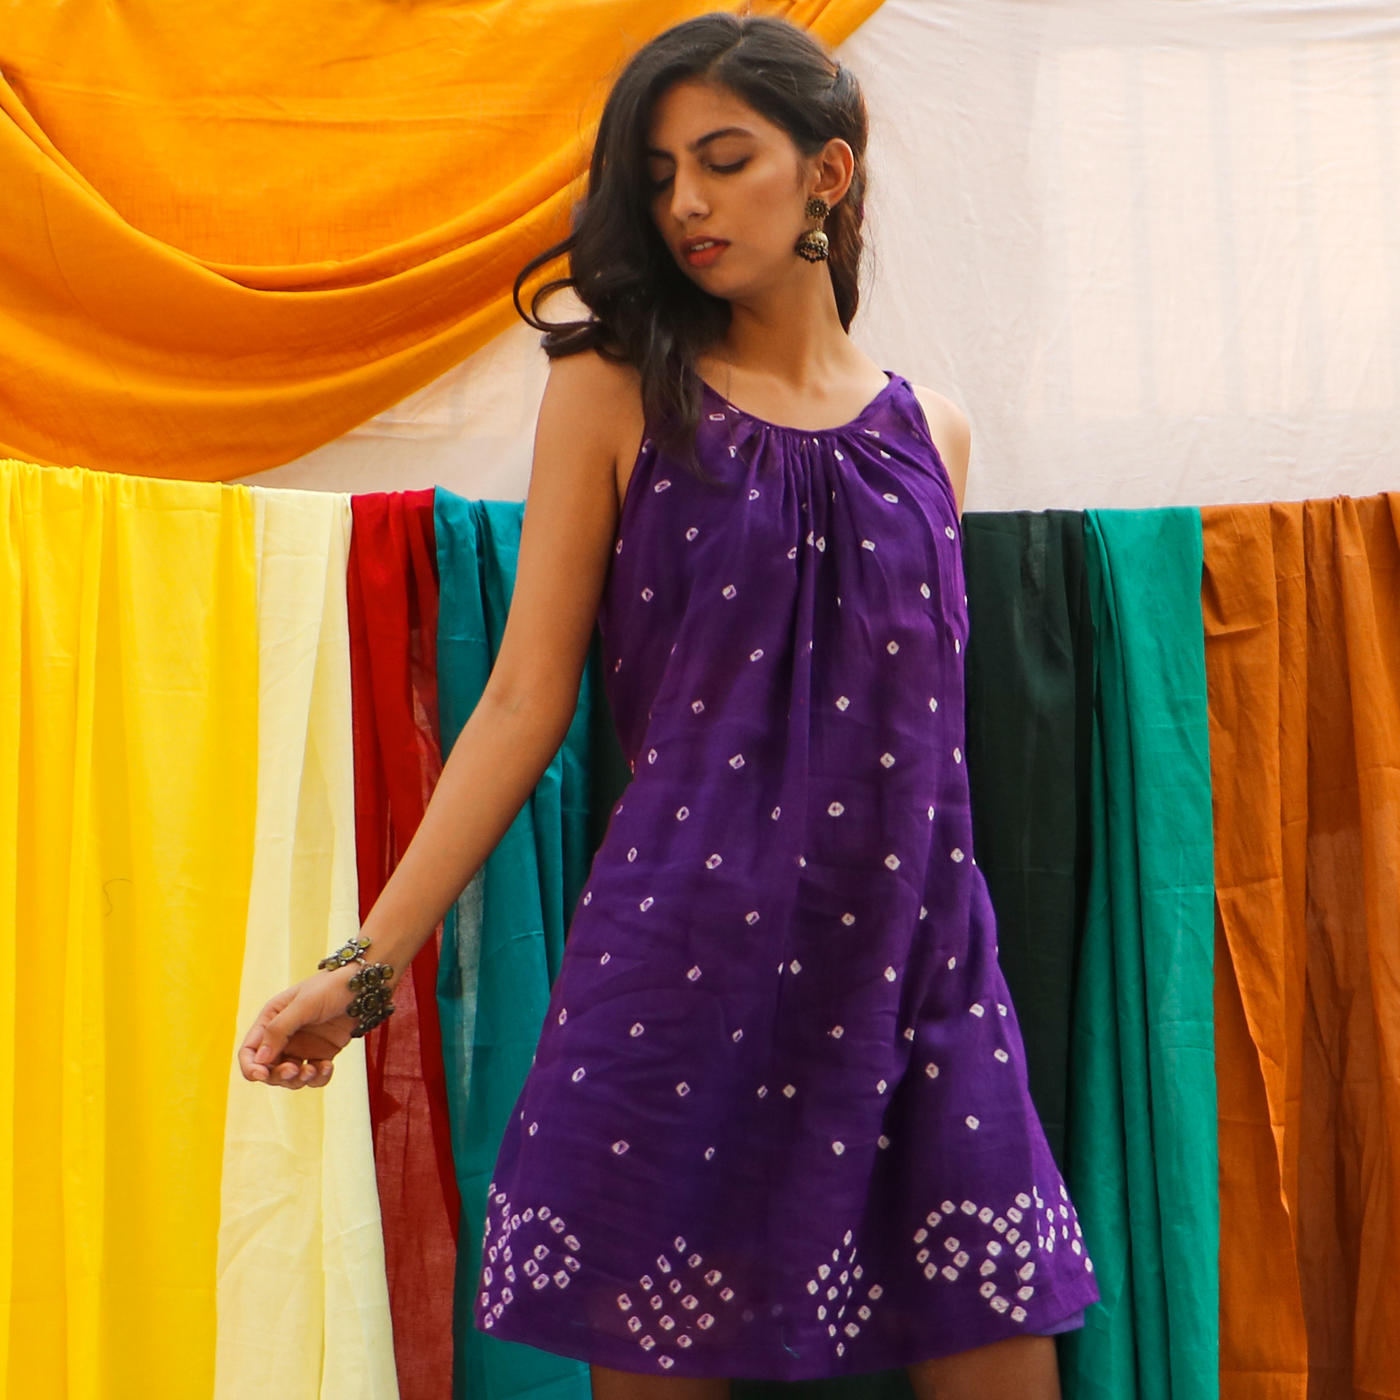 mini bandhani dress features drawstrings at the waist to tie at the back and comes with a slip dress to wear underneath.